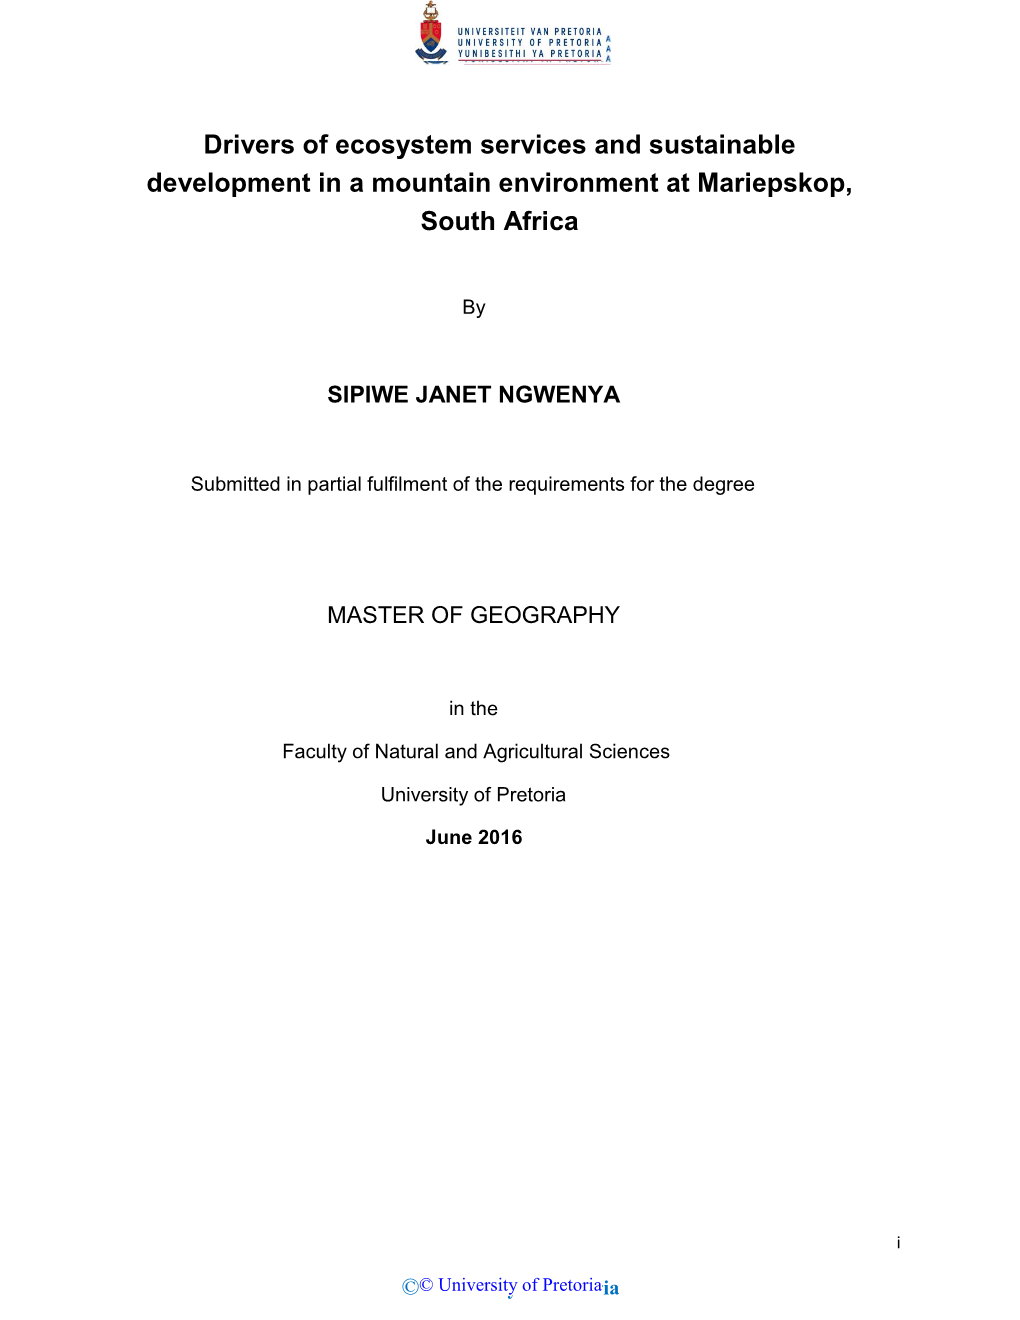 Drivers of Ecosystem Services and Sustainable Development in a Mountain Environment at Mariepskop